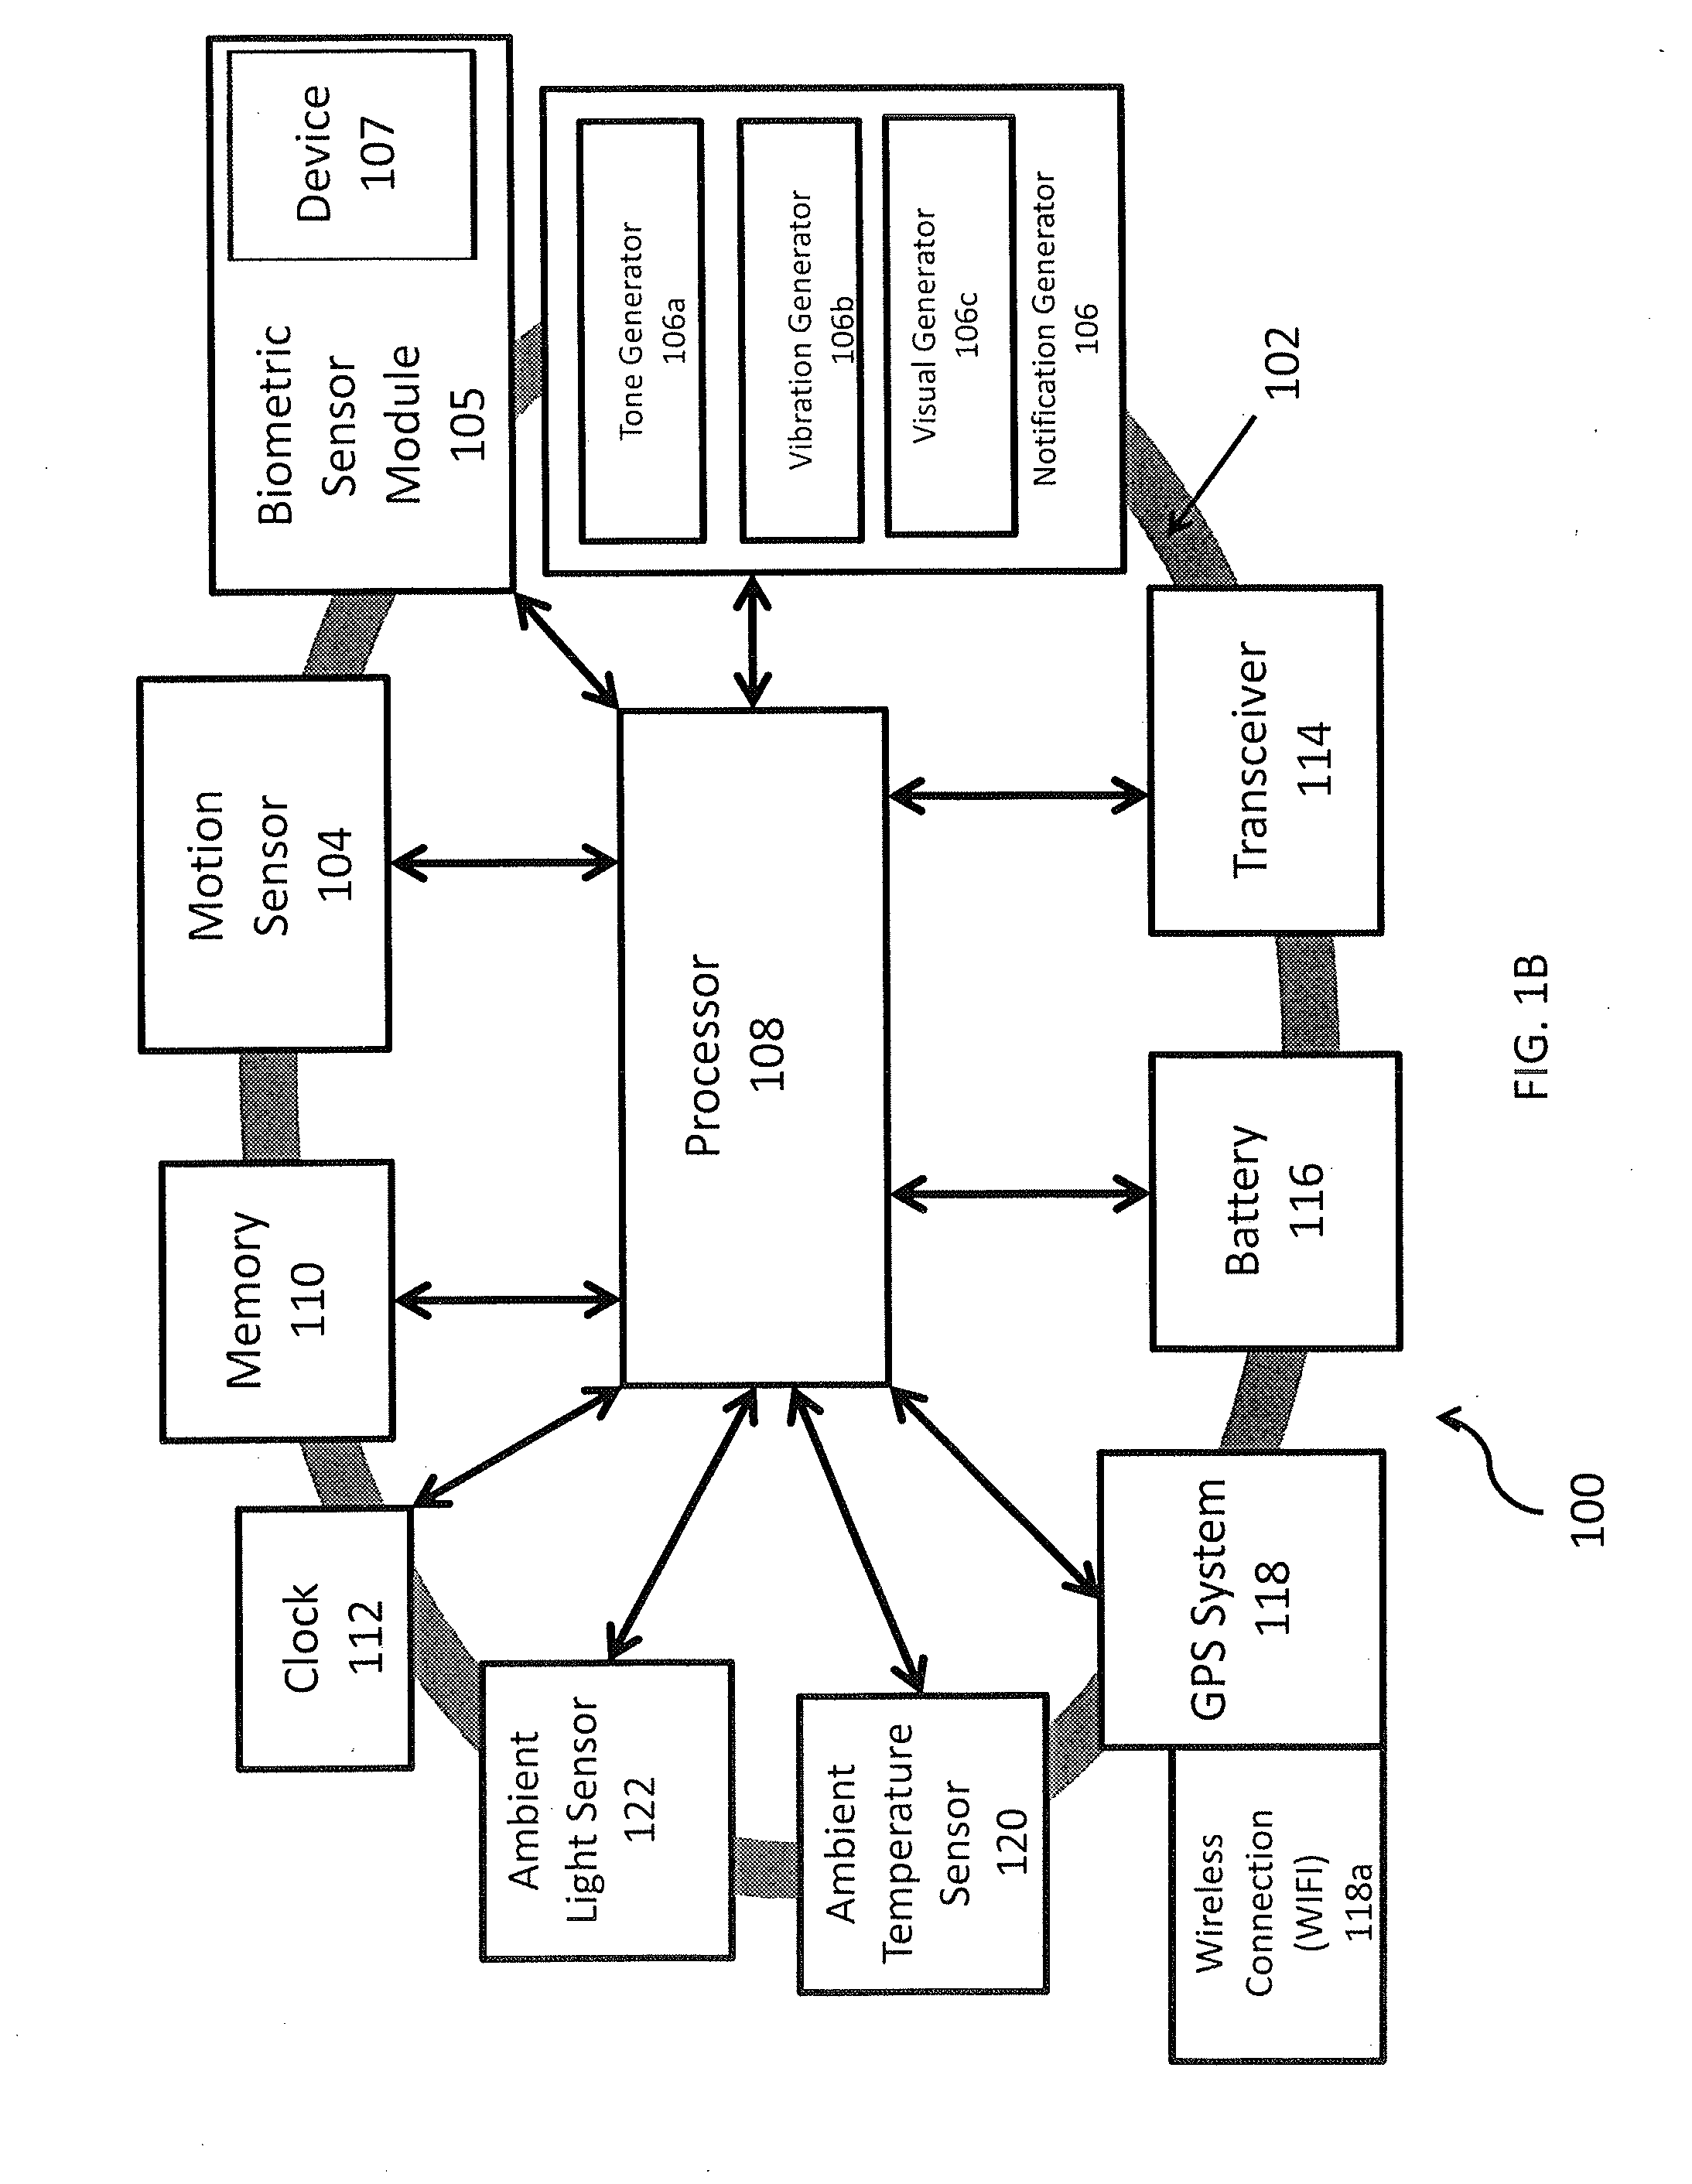 Systems, methods, and apparatus for monitoring alertness of an individual utilizing a wearable device and providing notification